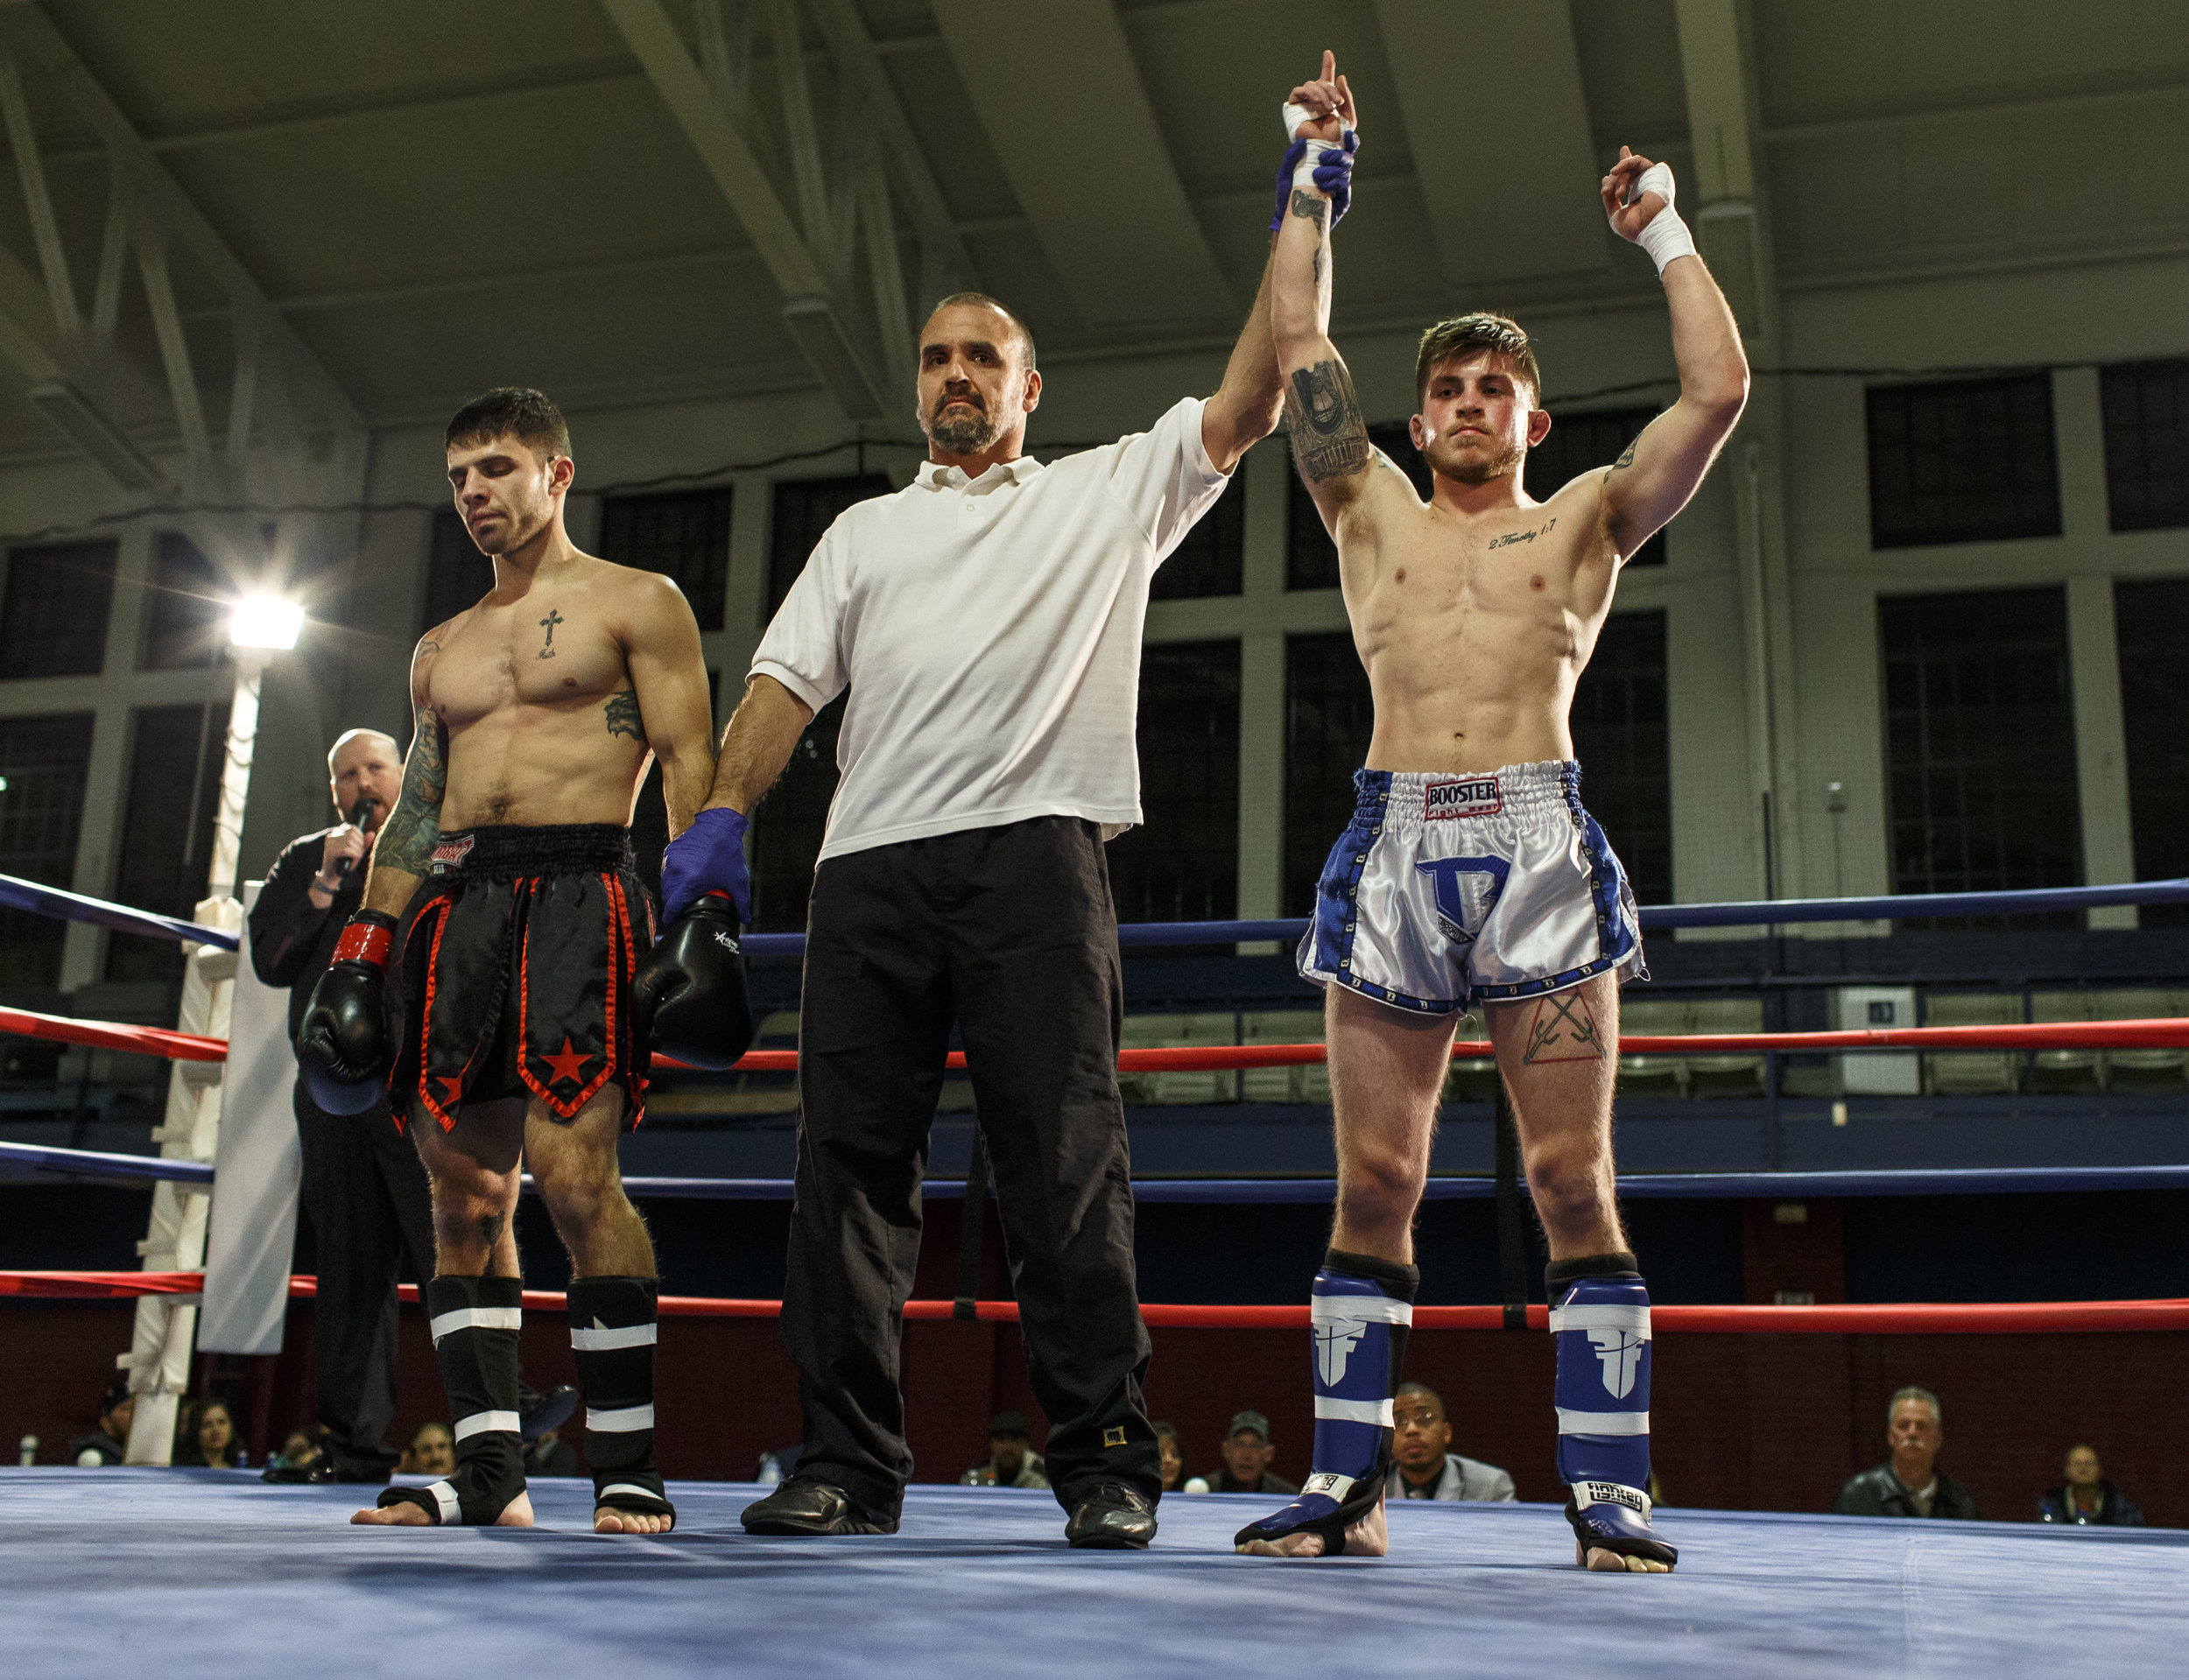  Nikolai Gionti raises his hands after winning the co-main event bout against Vanyo's Billy Freedson at the Goodyear Hall in Akron, Ohio on Wednesday, Nov. 23, 2016. 